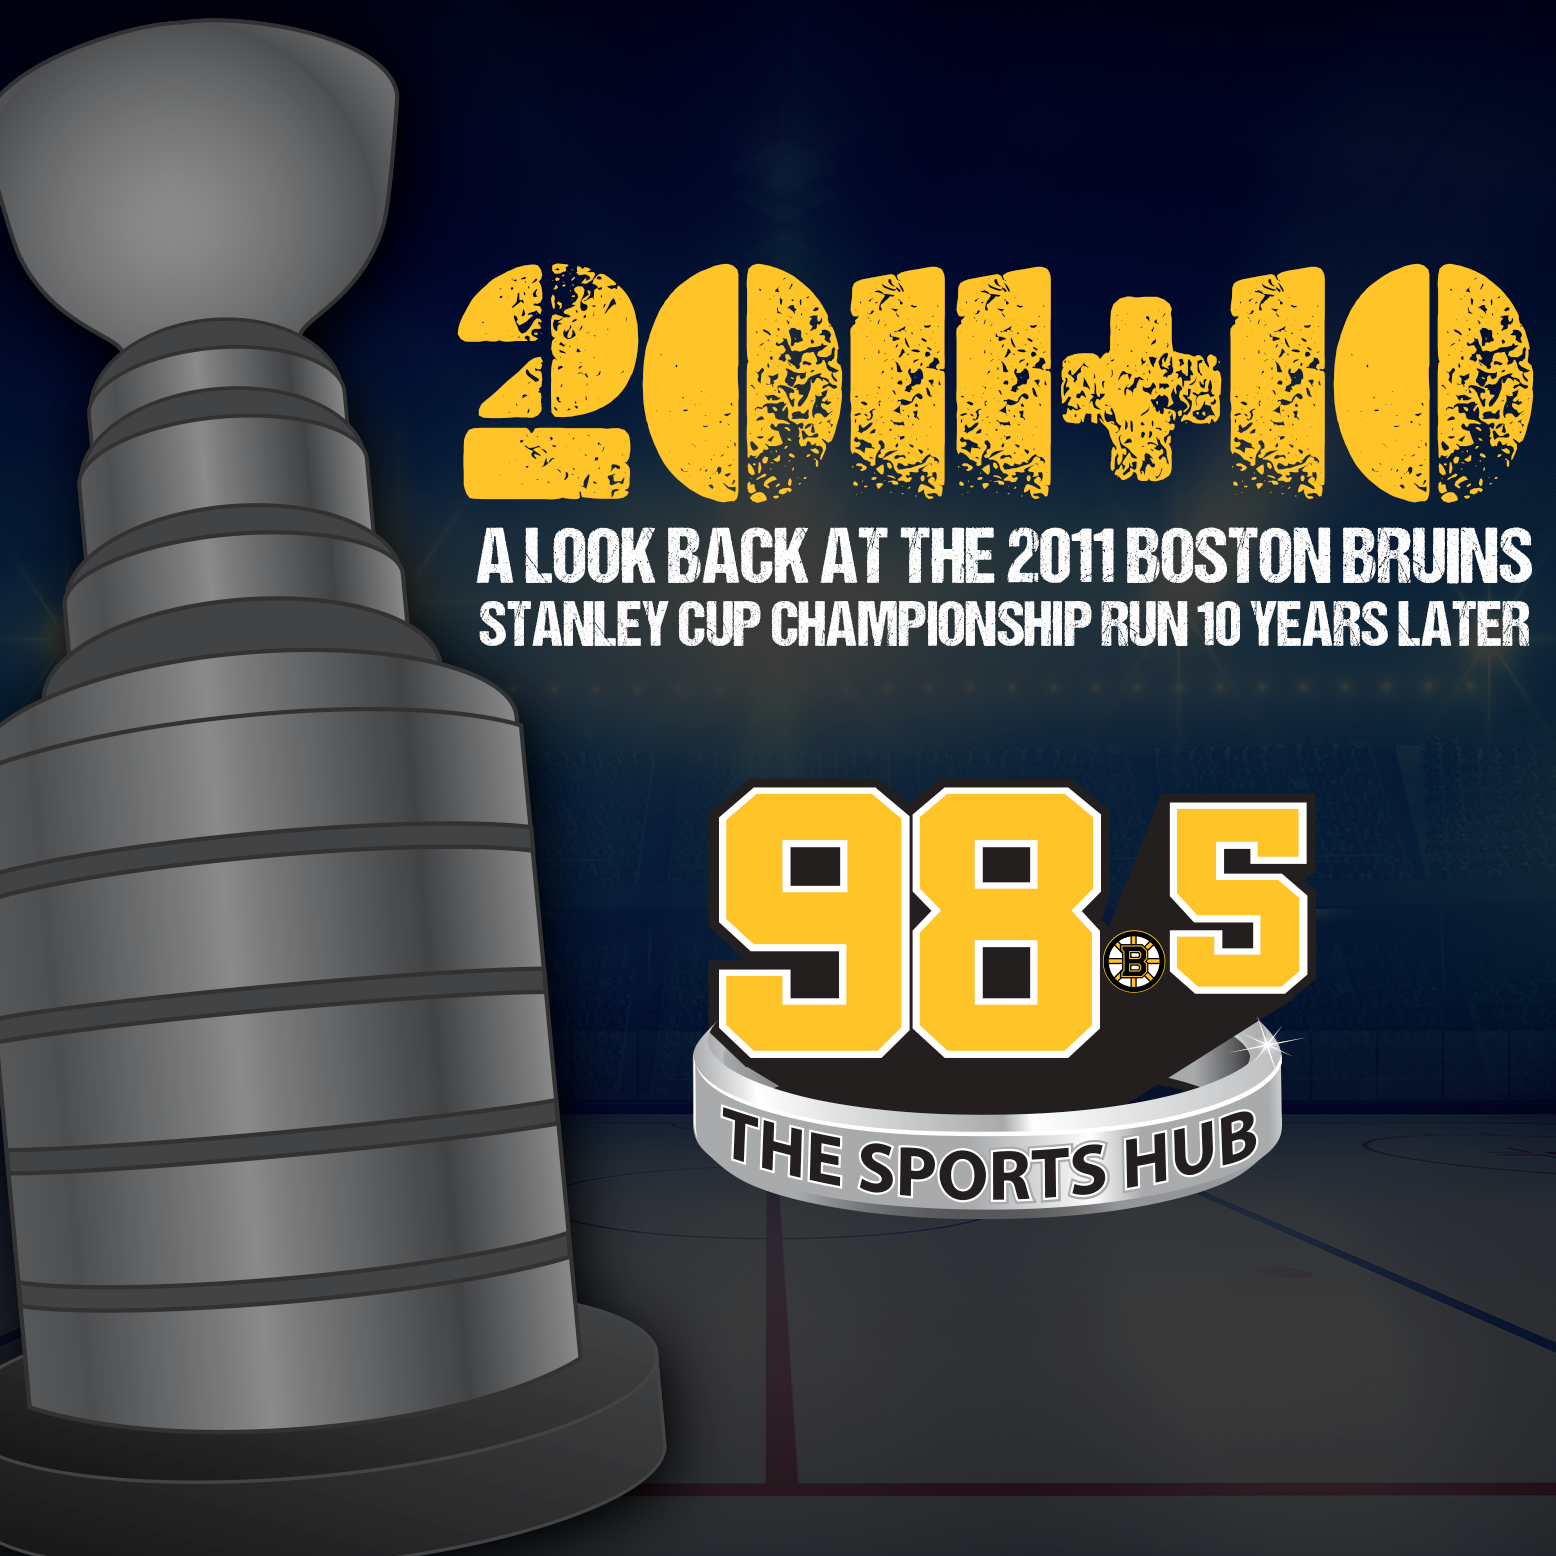 2011+10: A Look Back at the Boston Bruins Stanley Cup Run